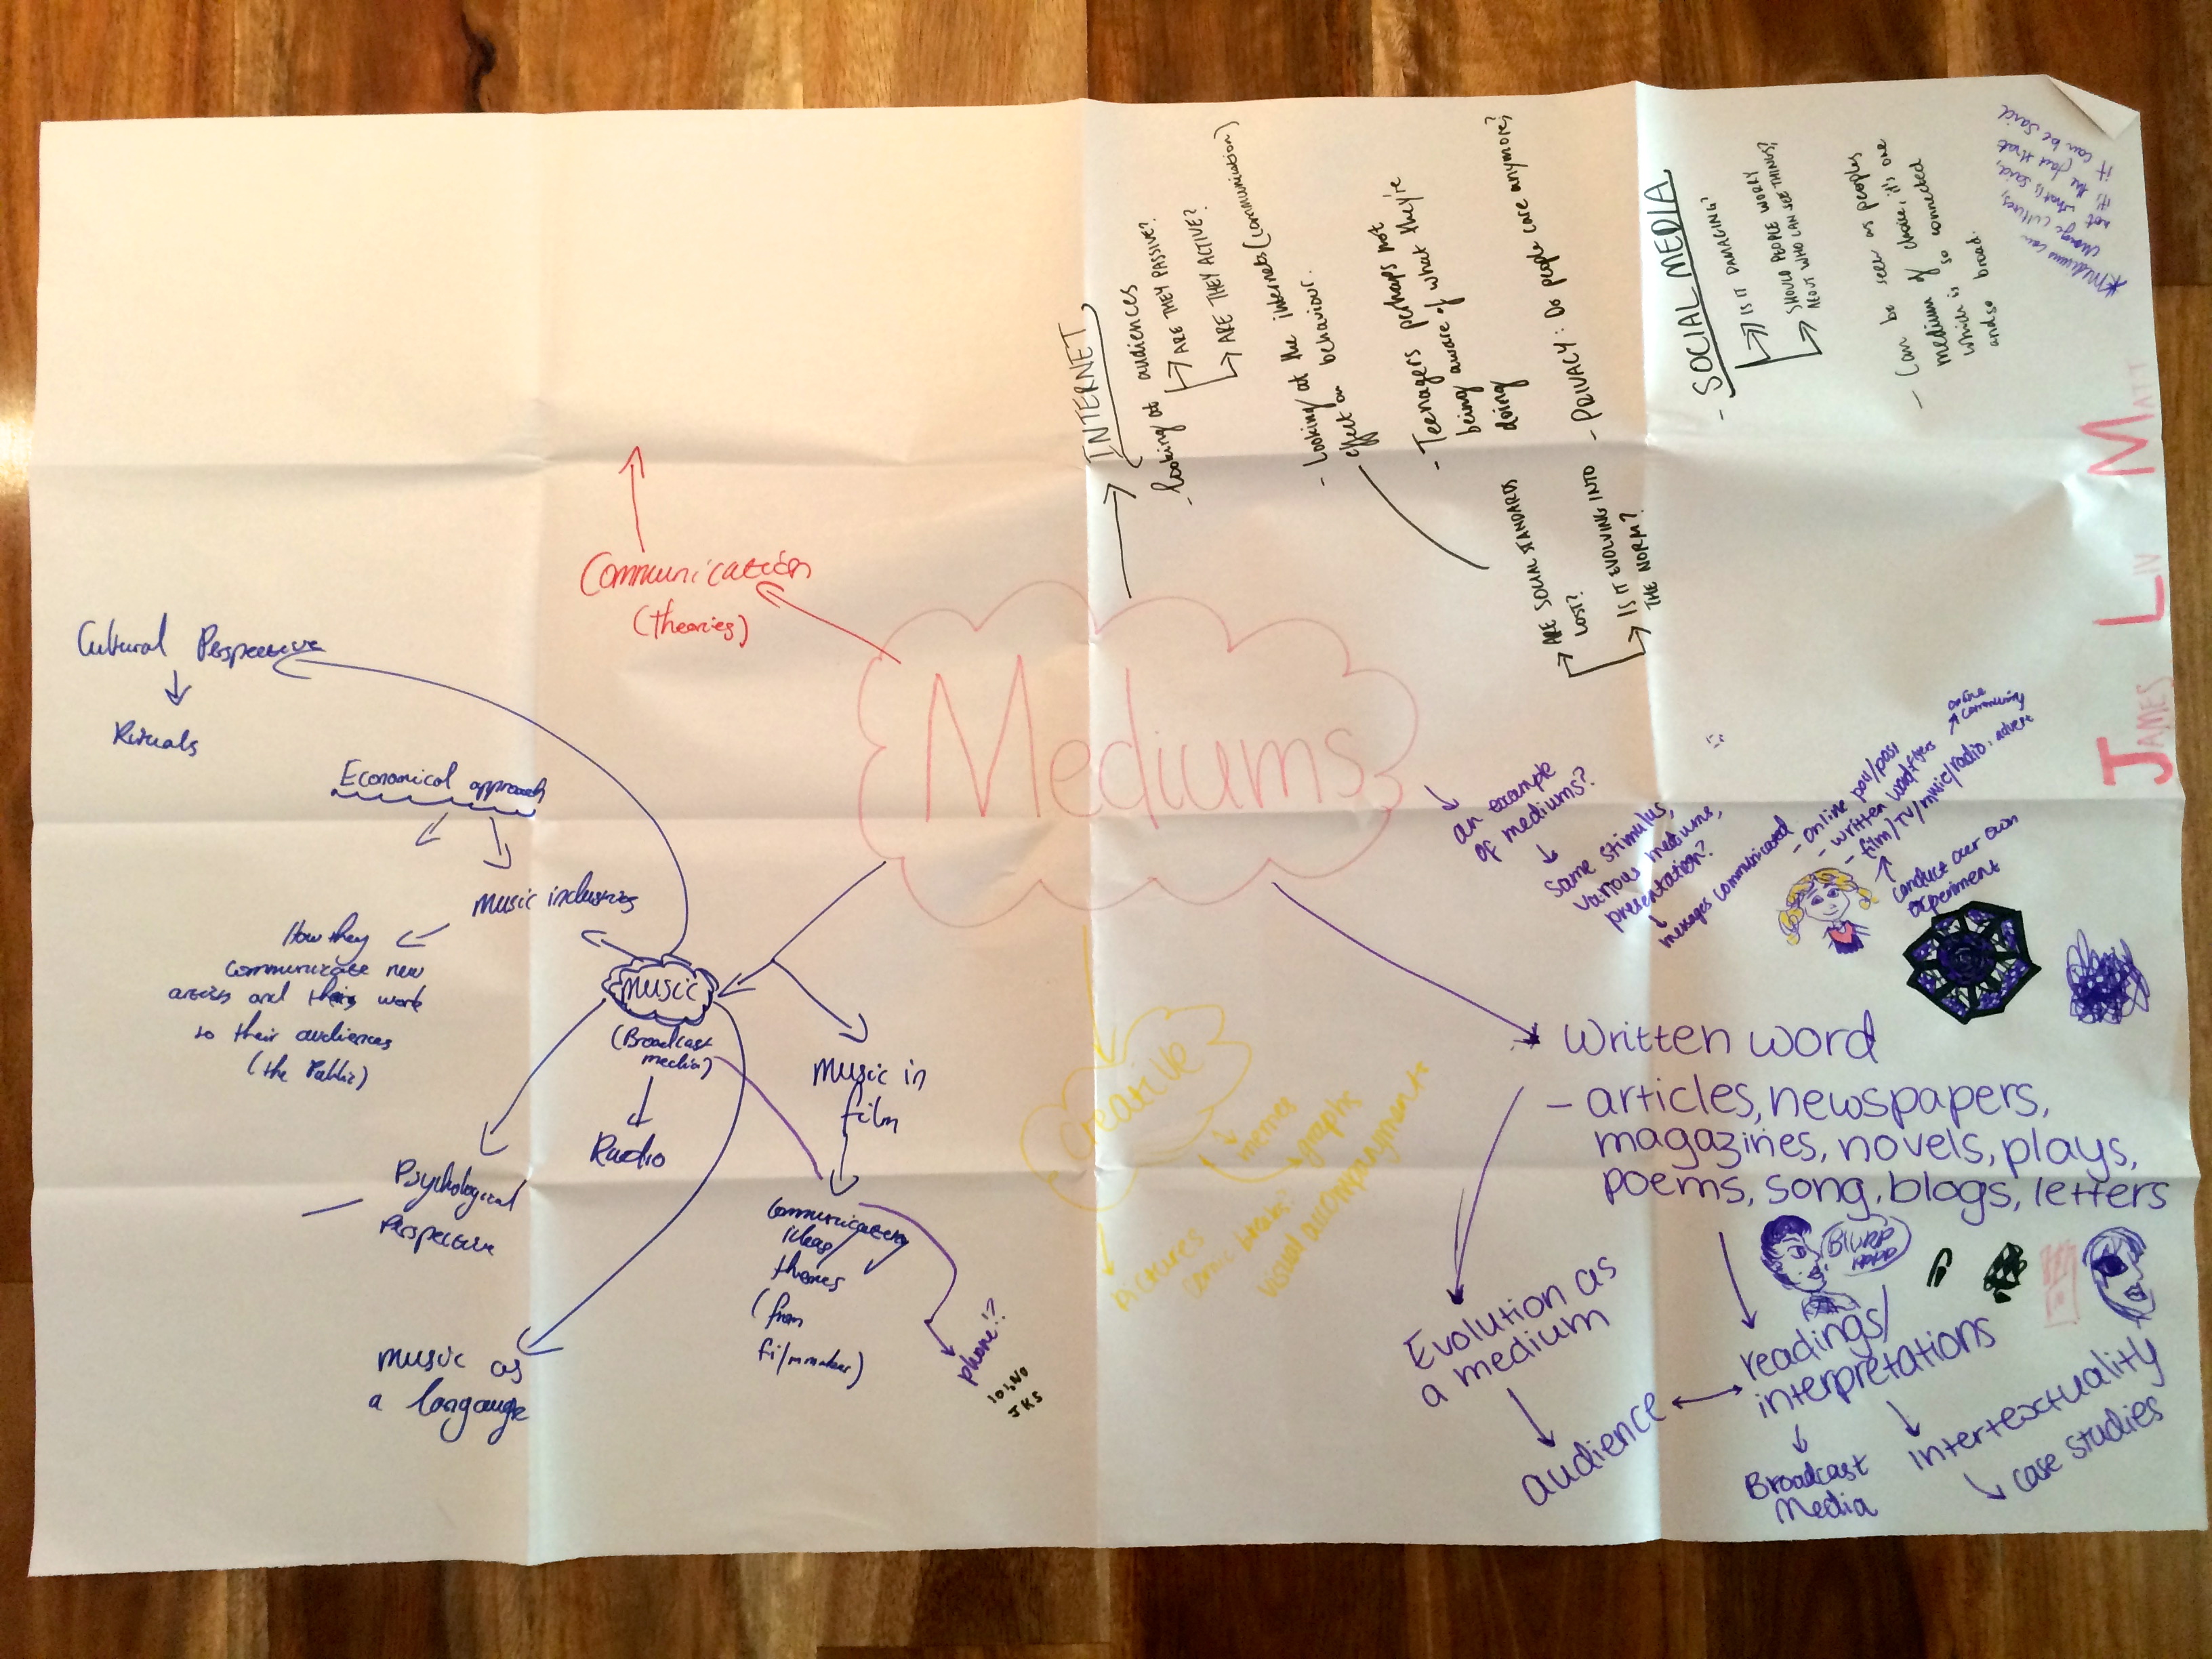 BUTCHERS PAPER (A PHOTO SHOWING THE BRAINSTORMING OF BRIEF 4